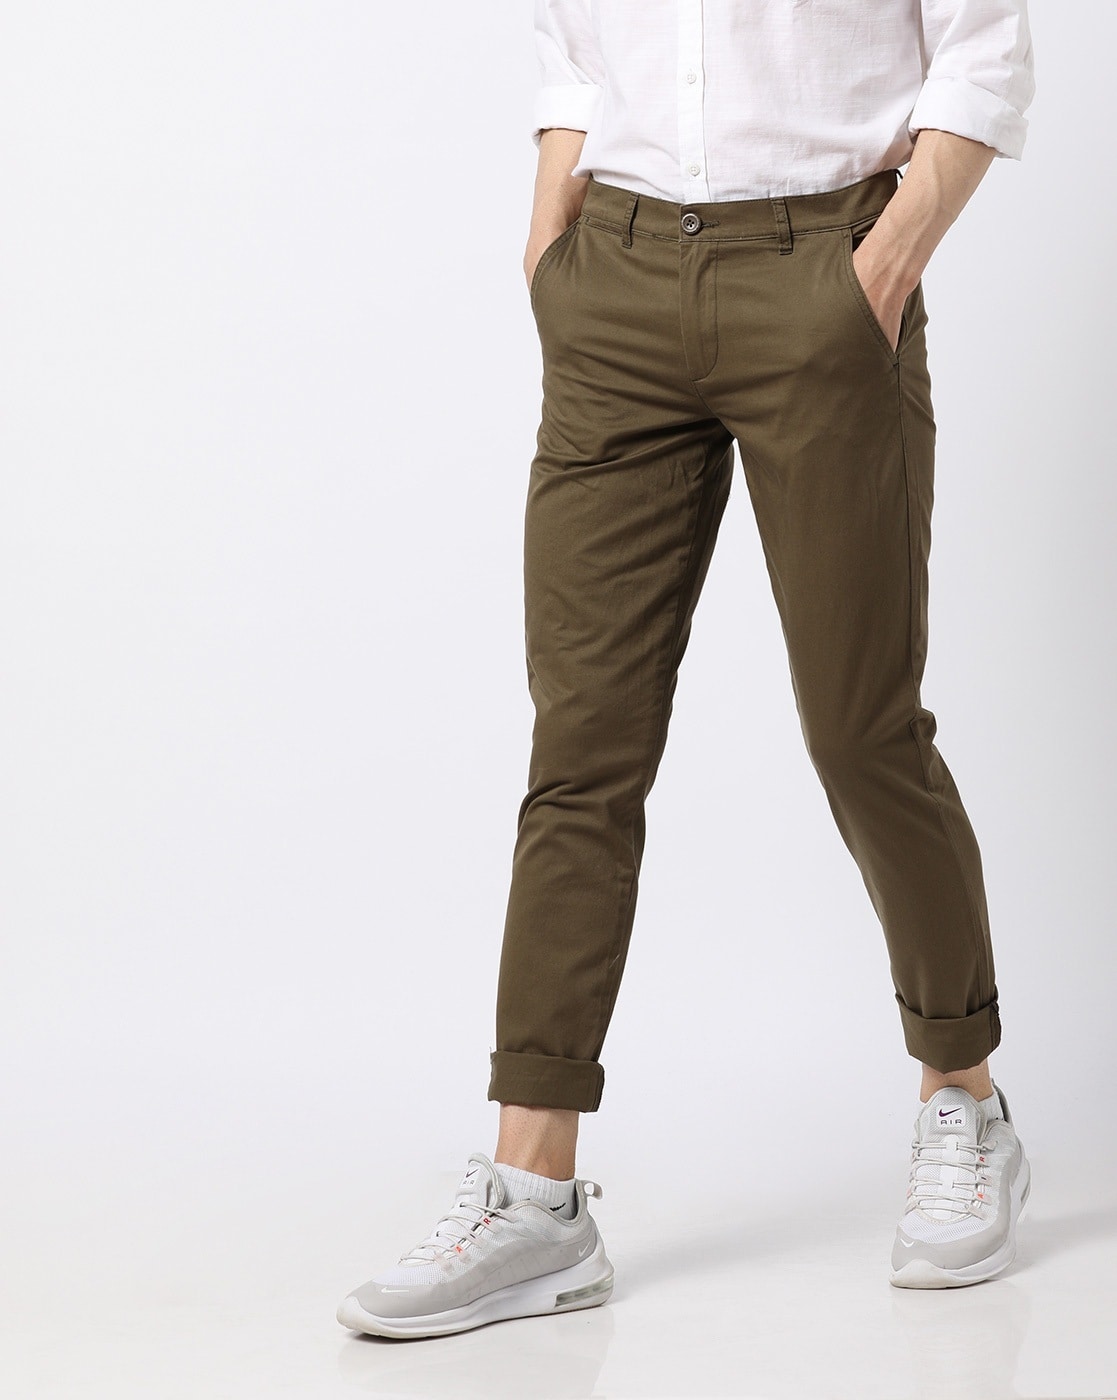 Buy Ketch Slate Grey Slim Fit Chinos Trouser for Men Online at Rs511   Ketch